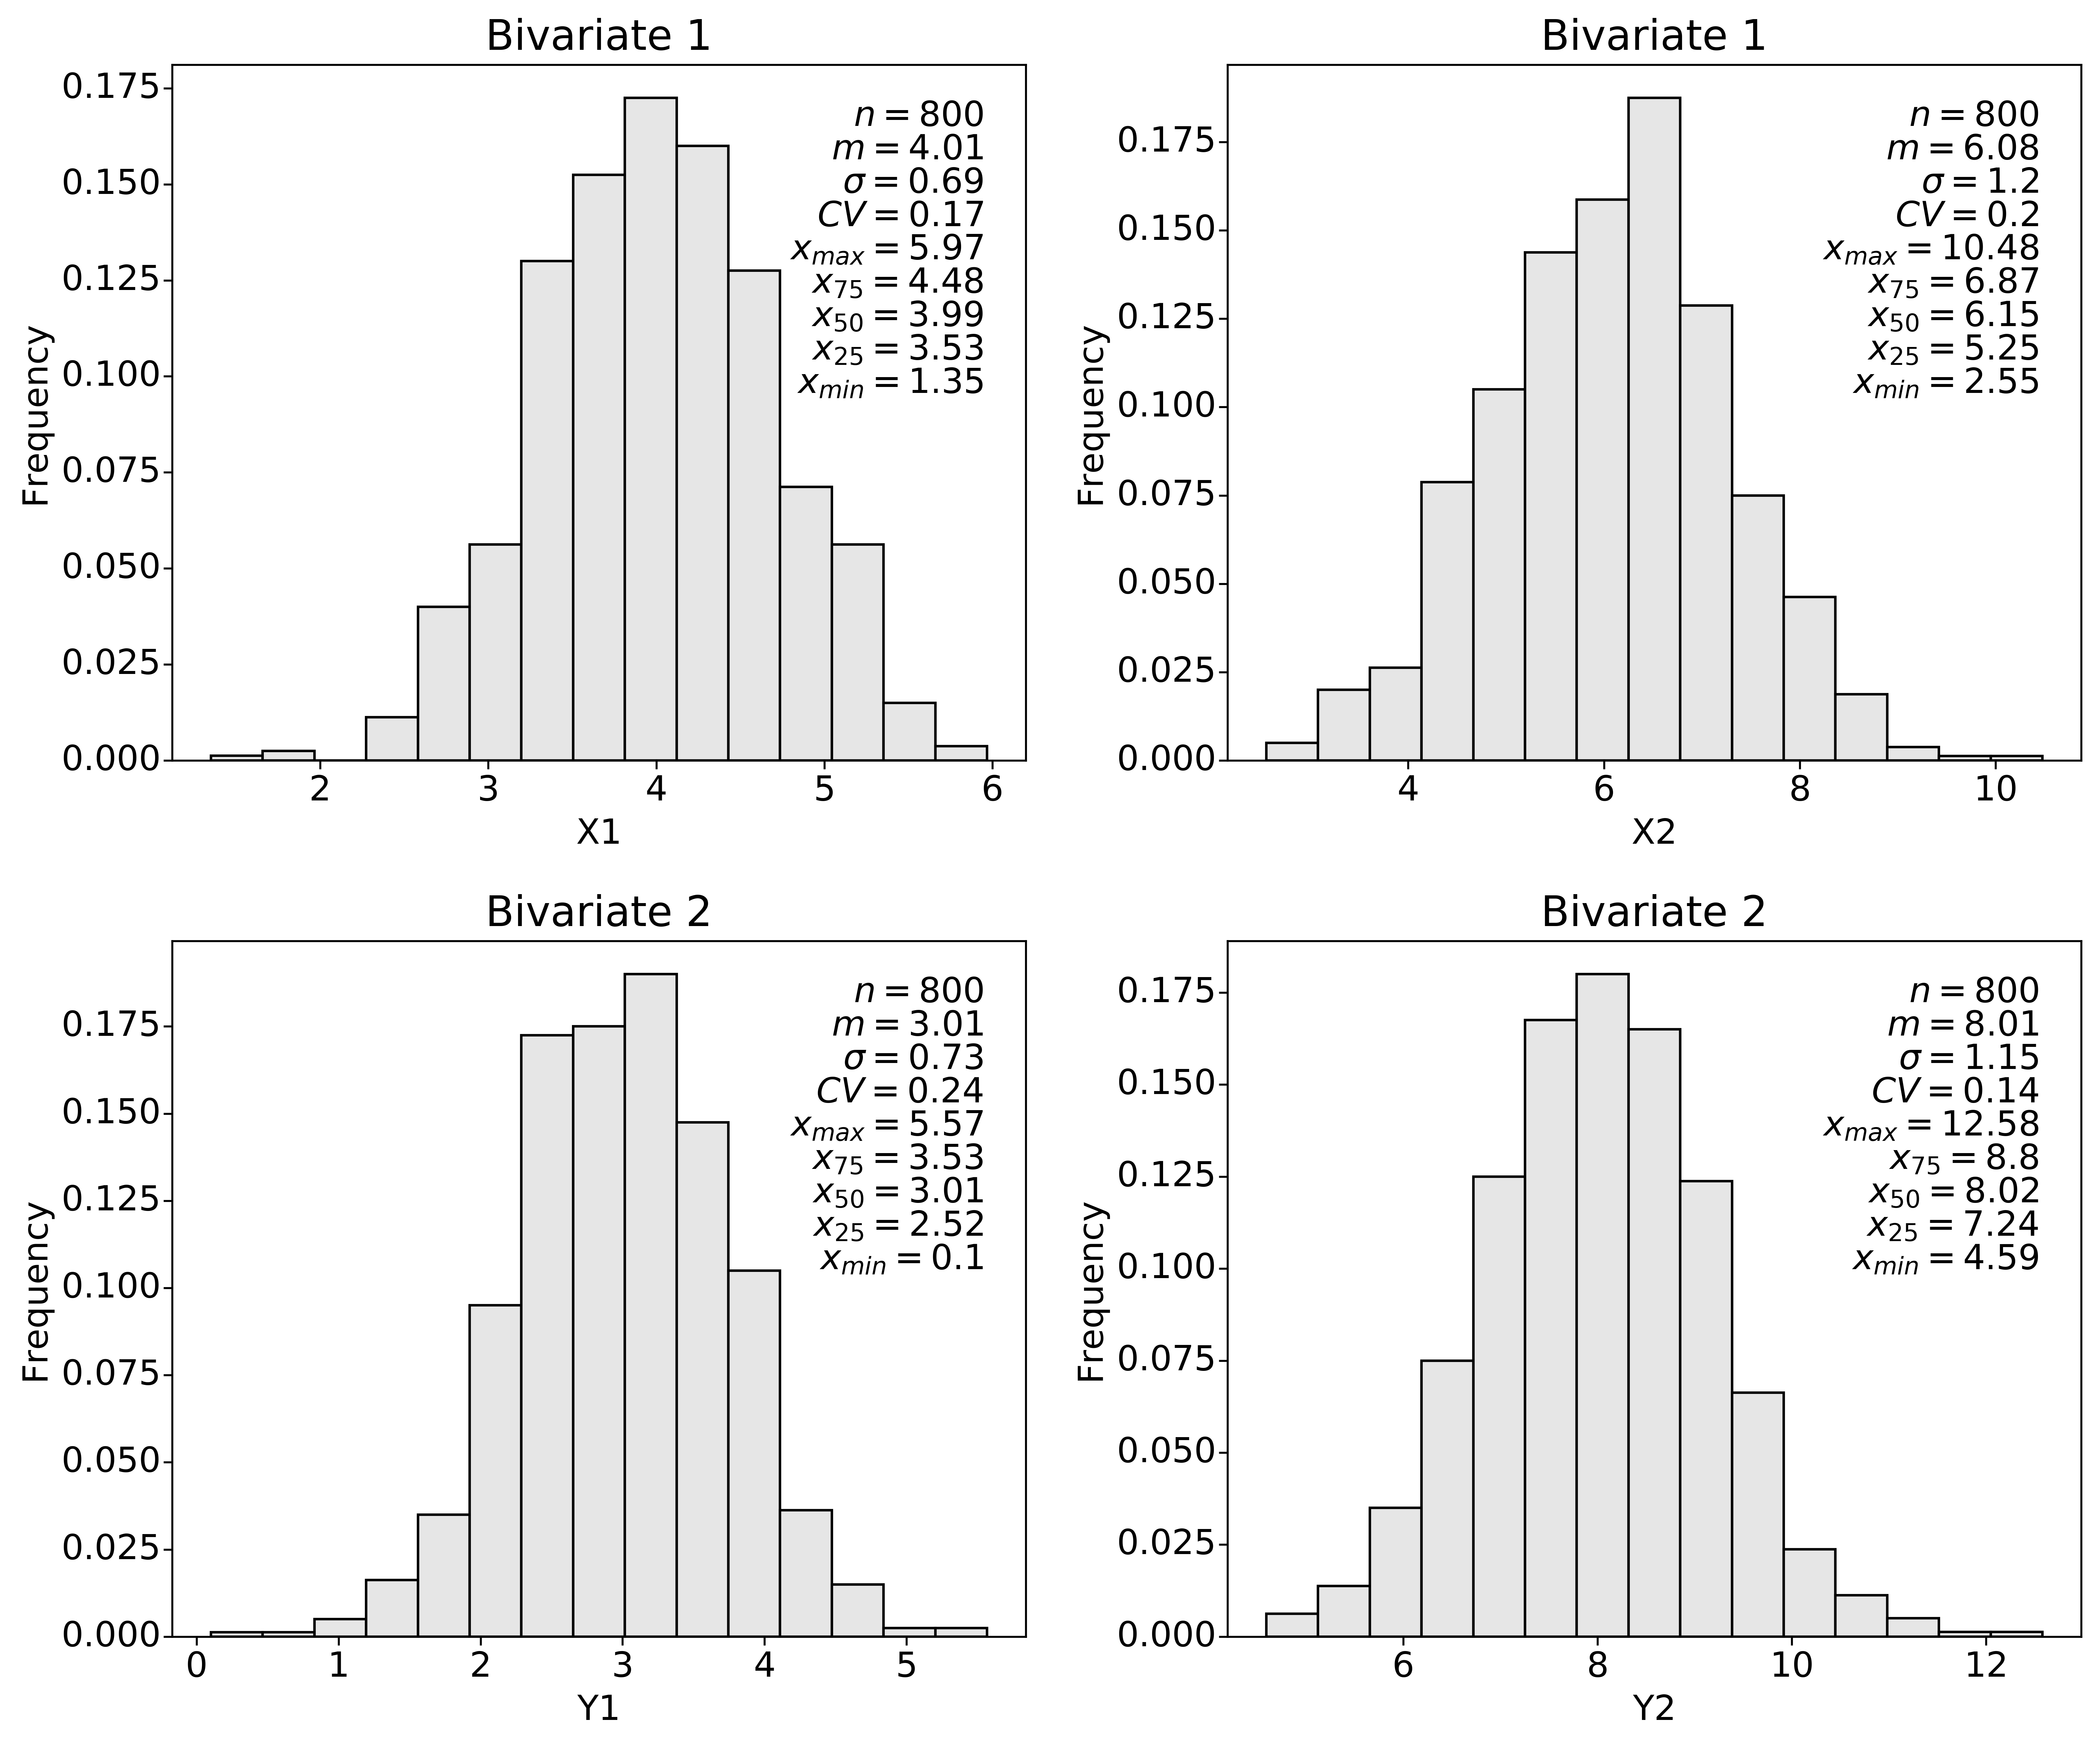 Histograms of the simulated variables